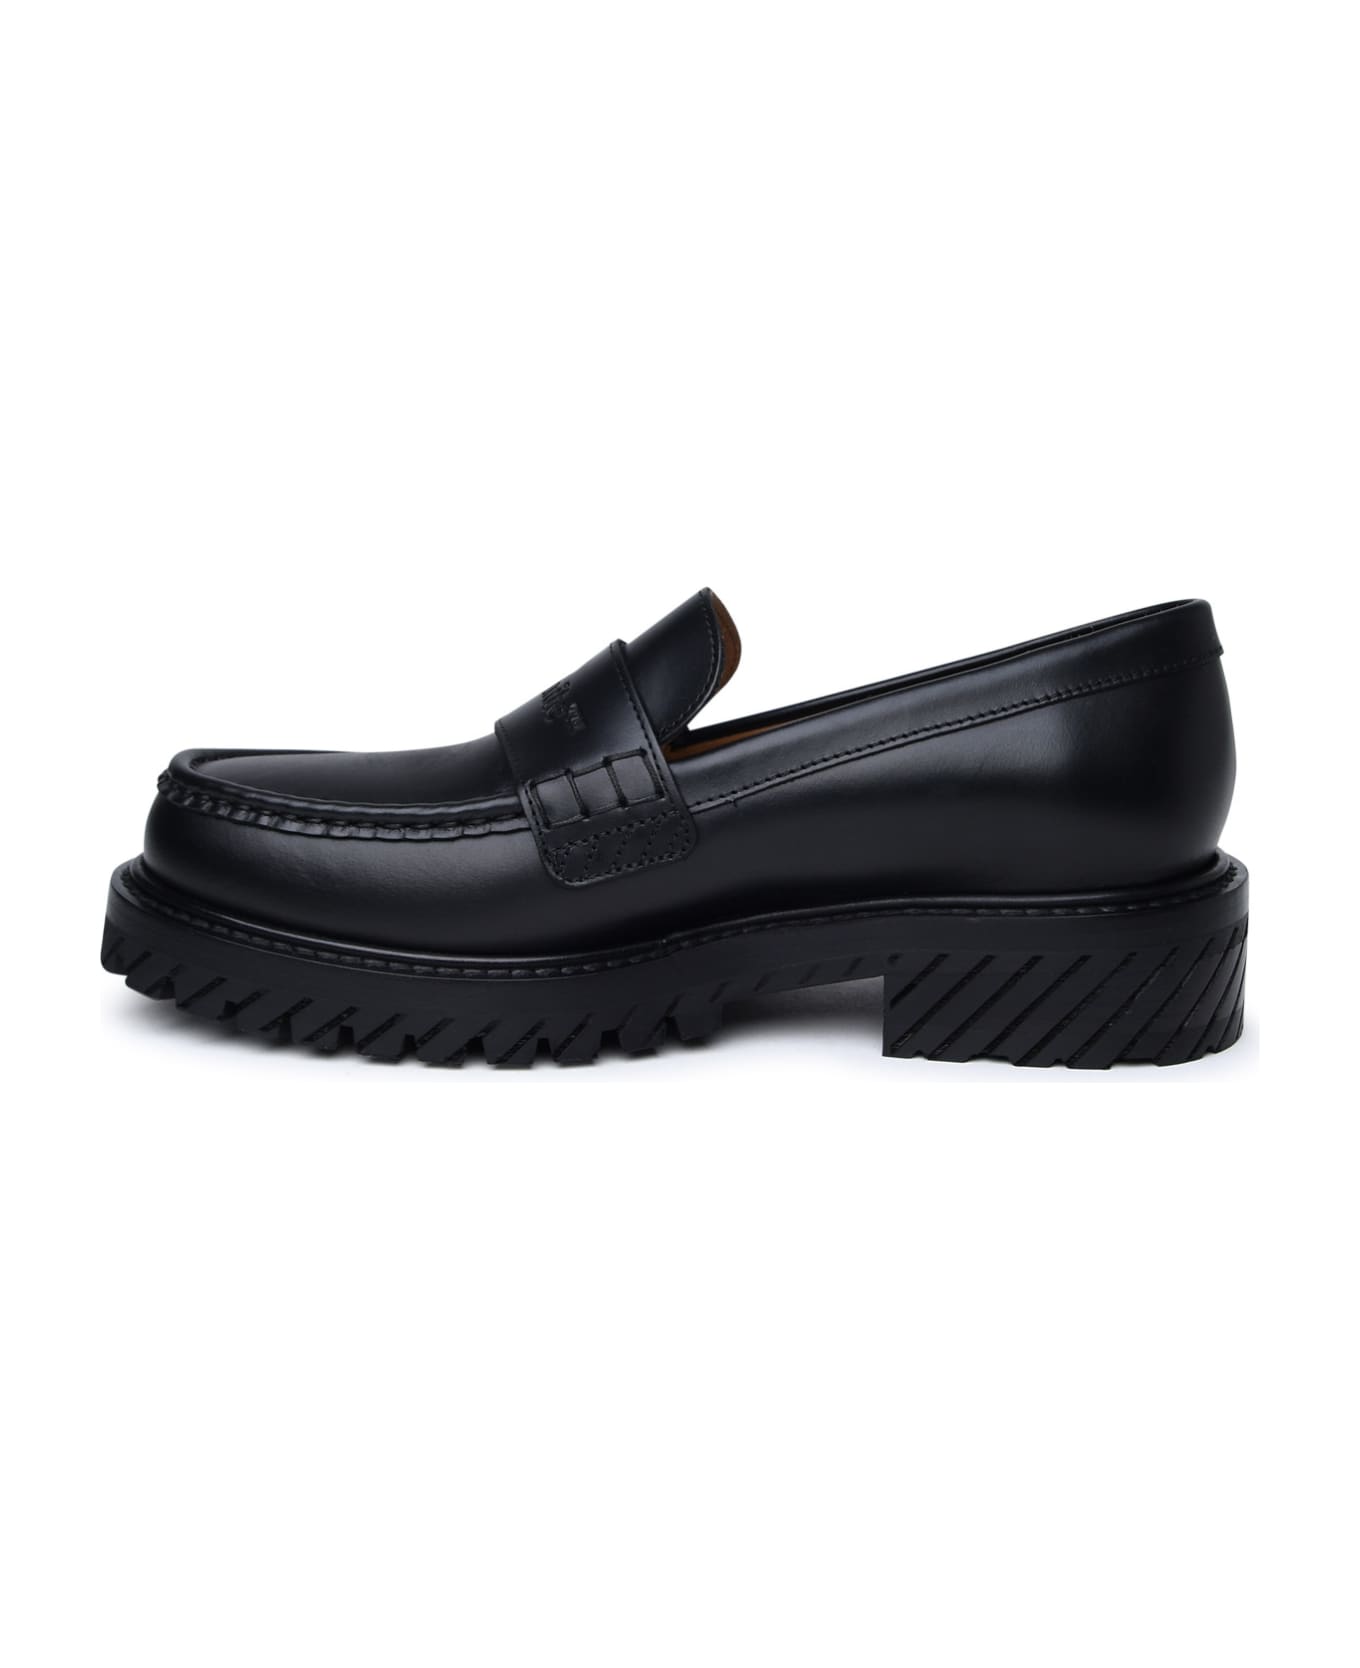 Off-White Leather Loafers - Black